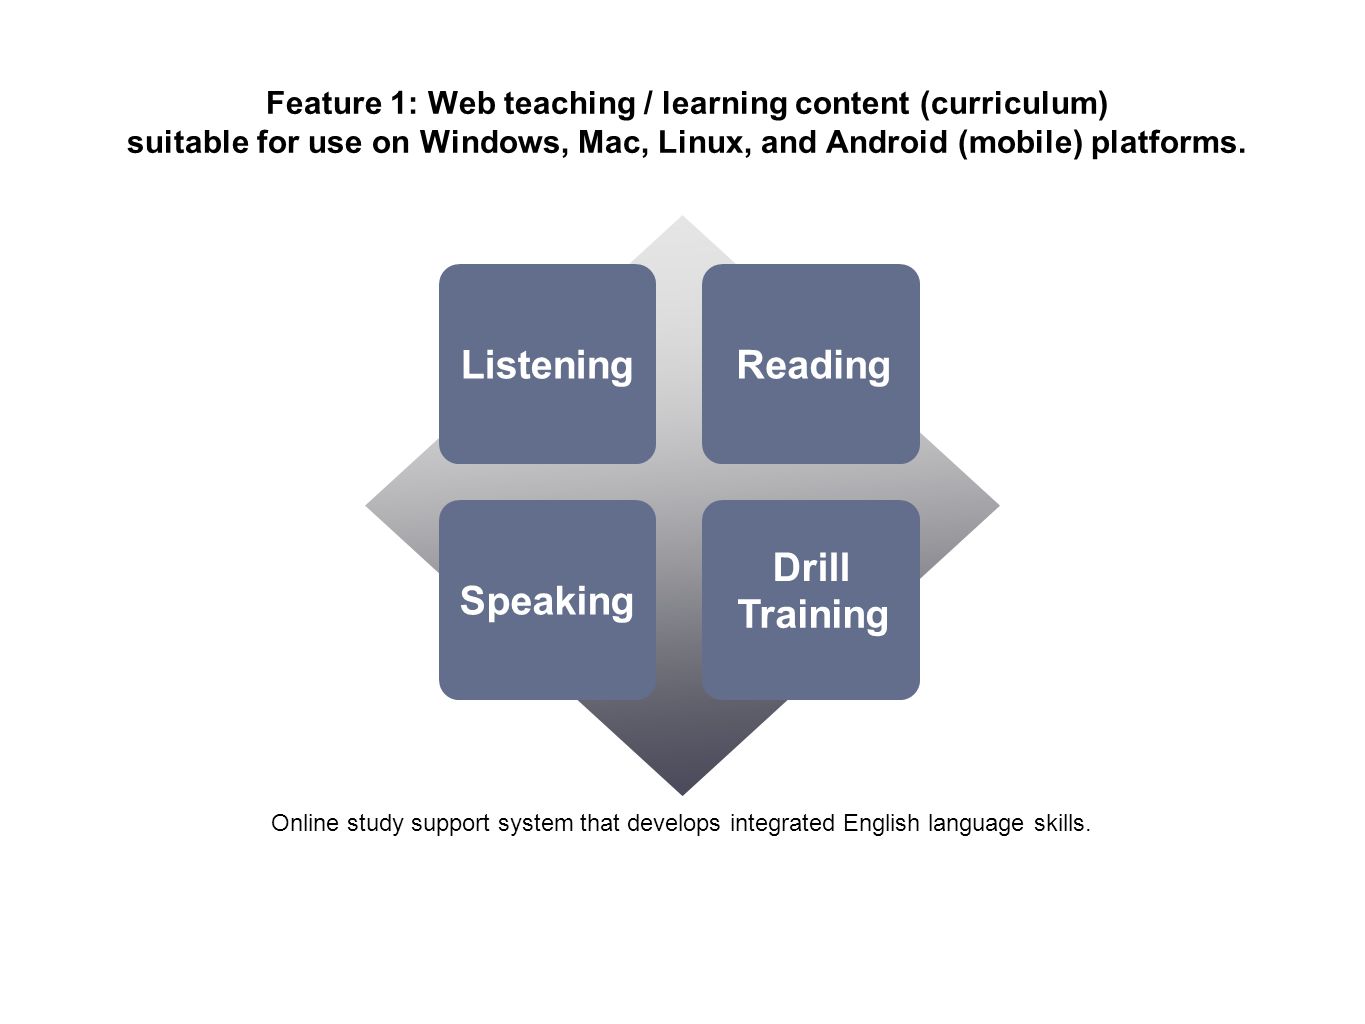 Feature 1: Web teaching / learning content (curriculum) suitable for use on Windows, Mac, Linux, and Android (mobile) platforms.